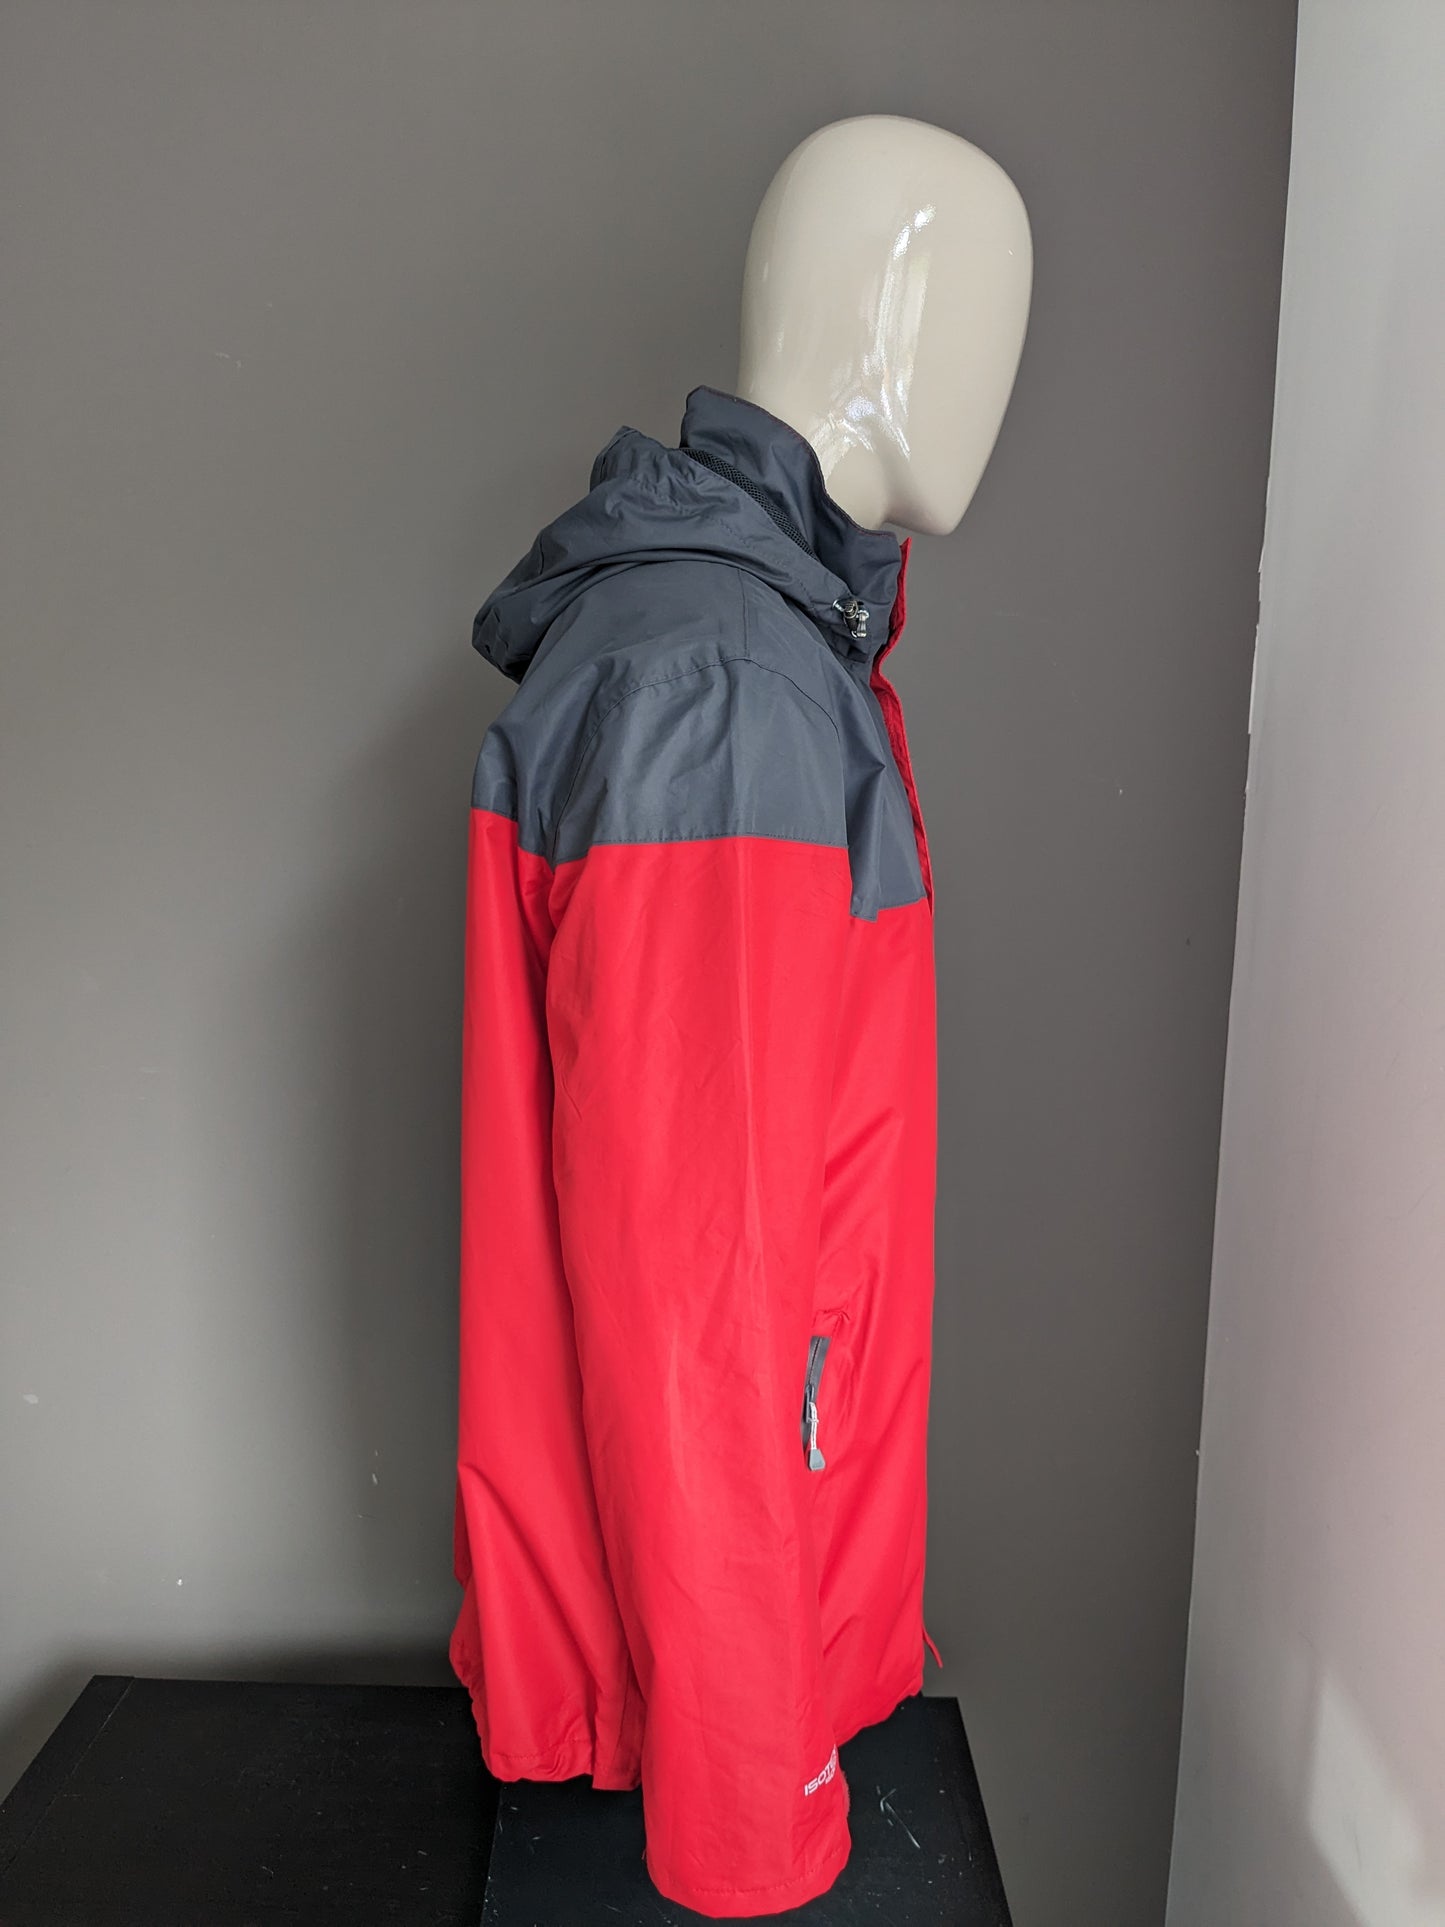 Regatta outdoor jacket with hood. Red gray colored. Size XL.